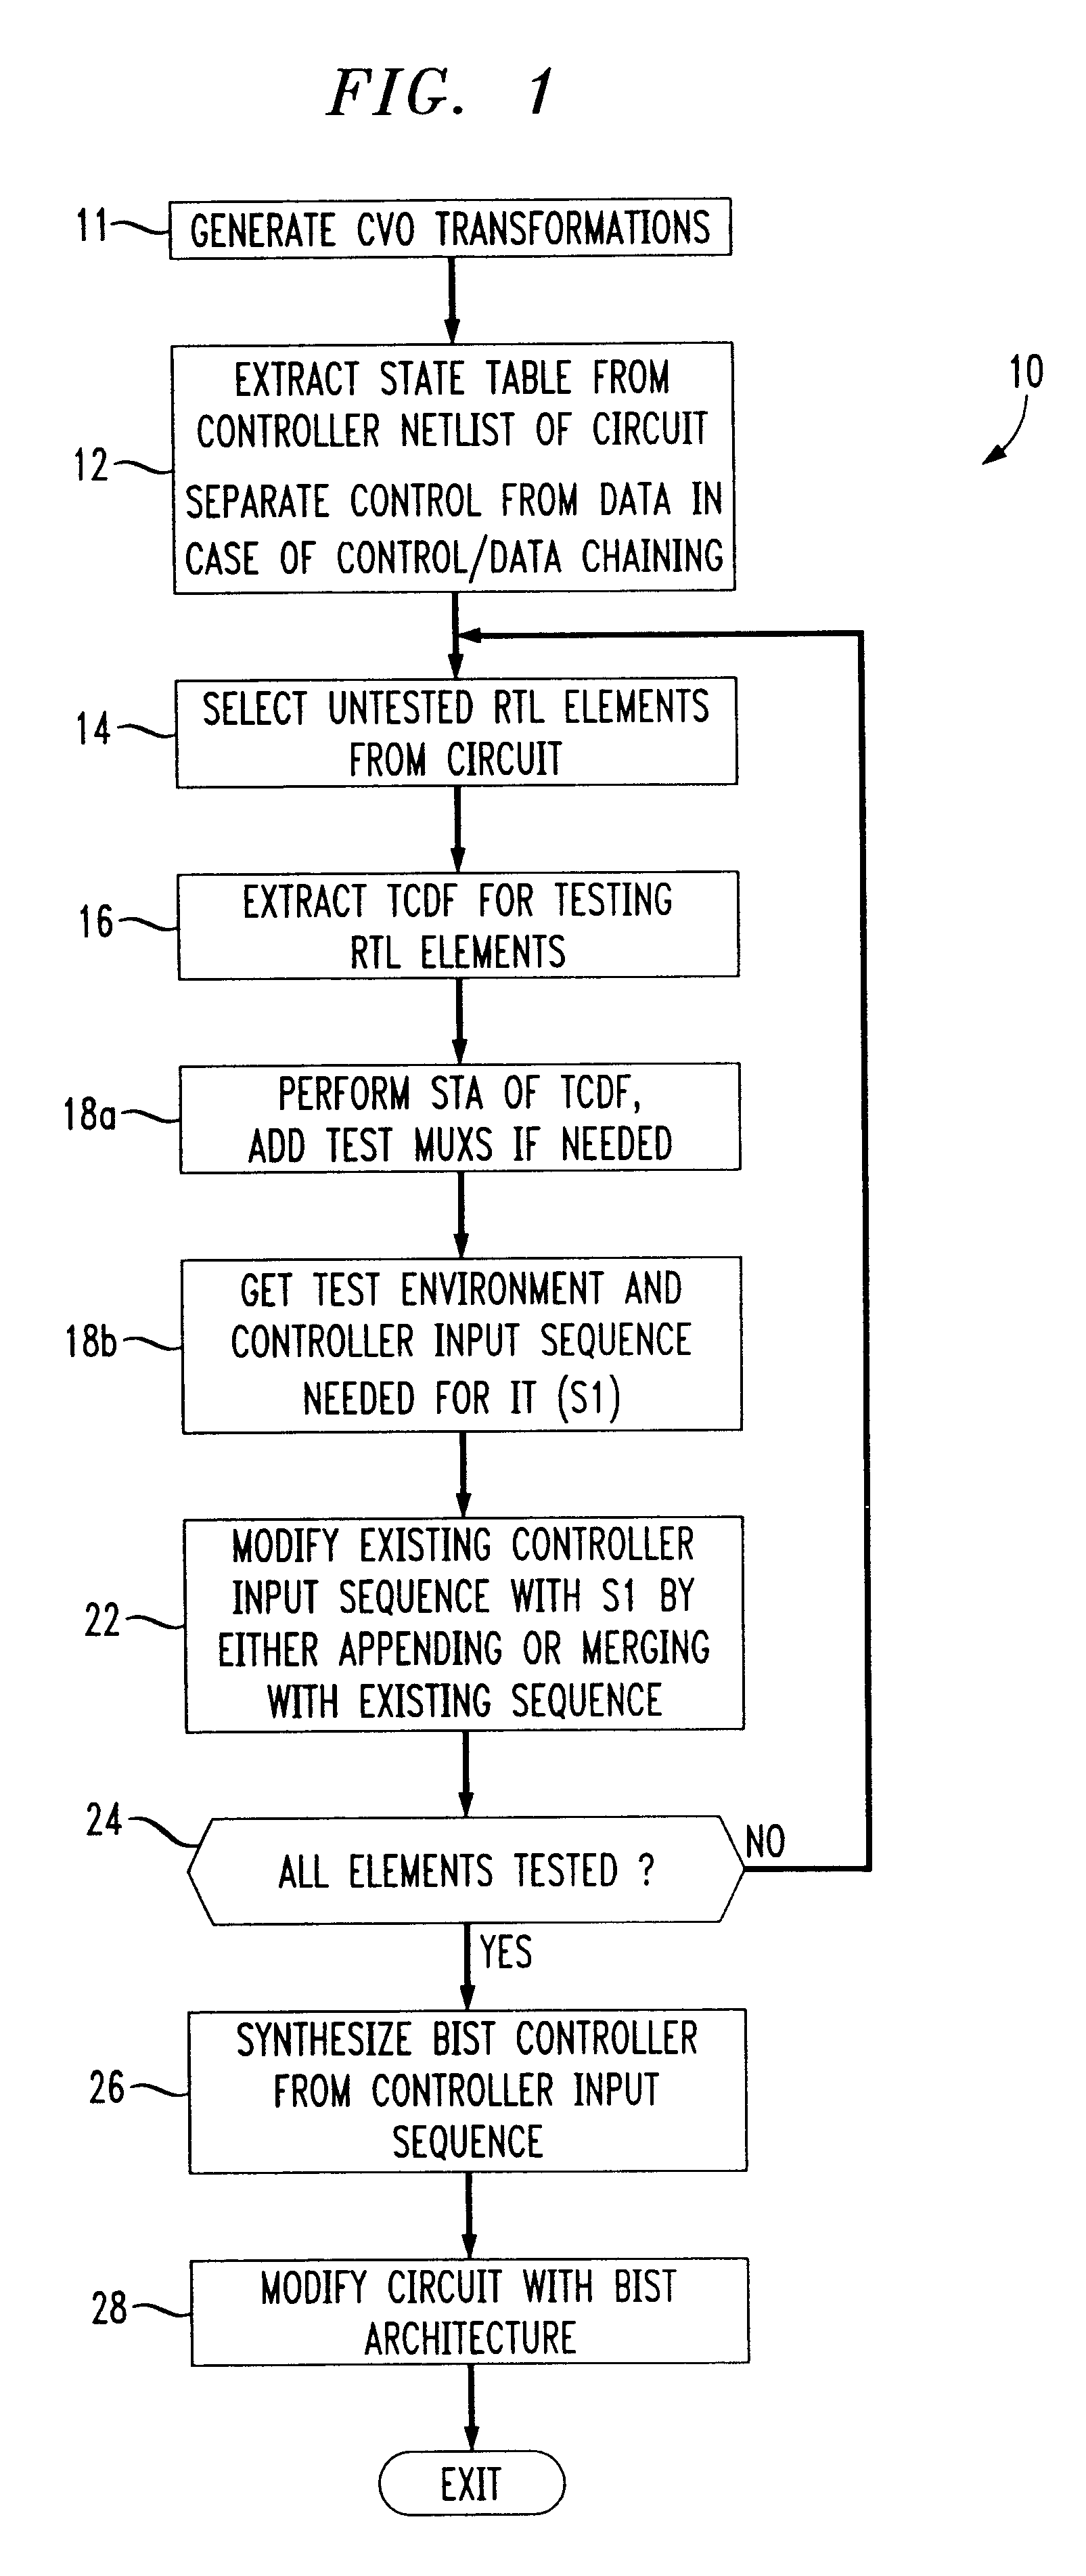 Method for implementing a bist scheme into integrated circuits for testing RTL controller-data paths in the integrated circuits